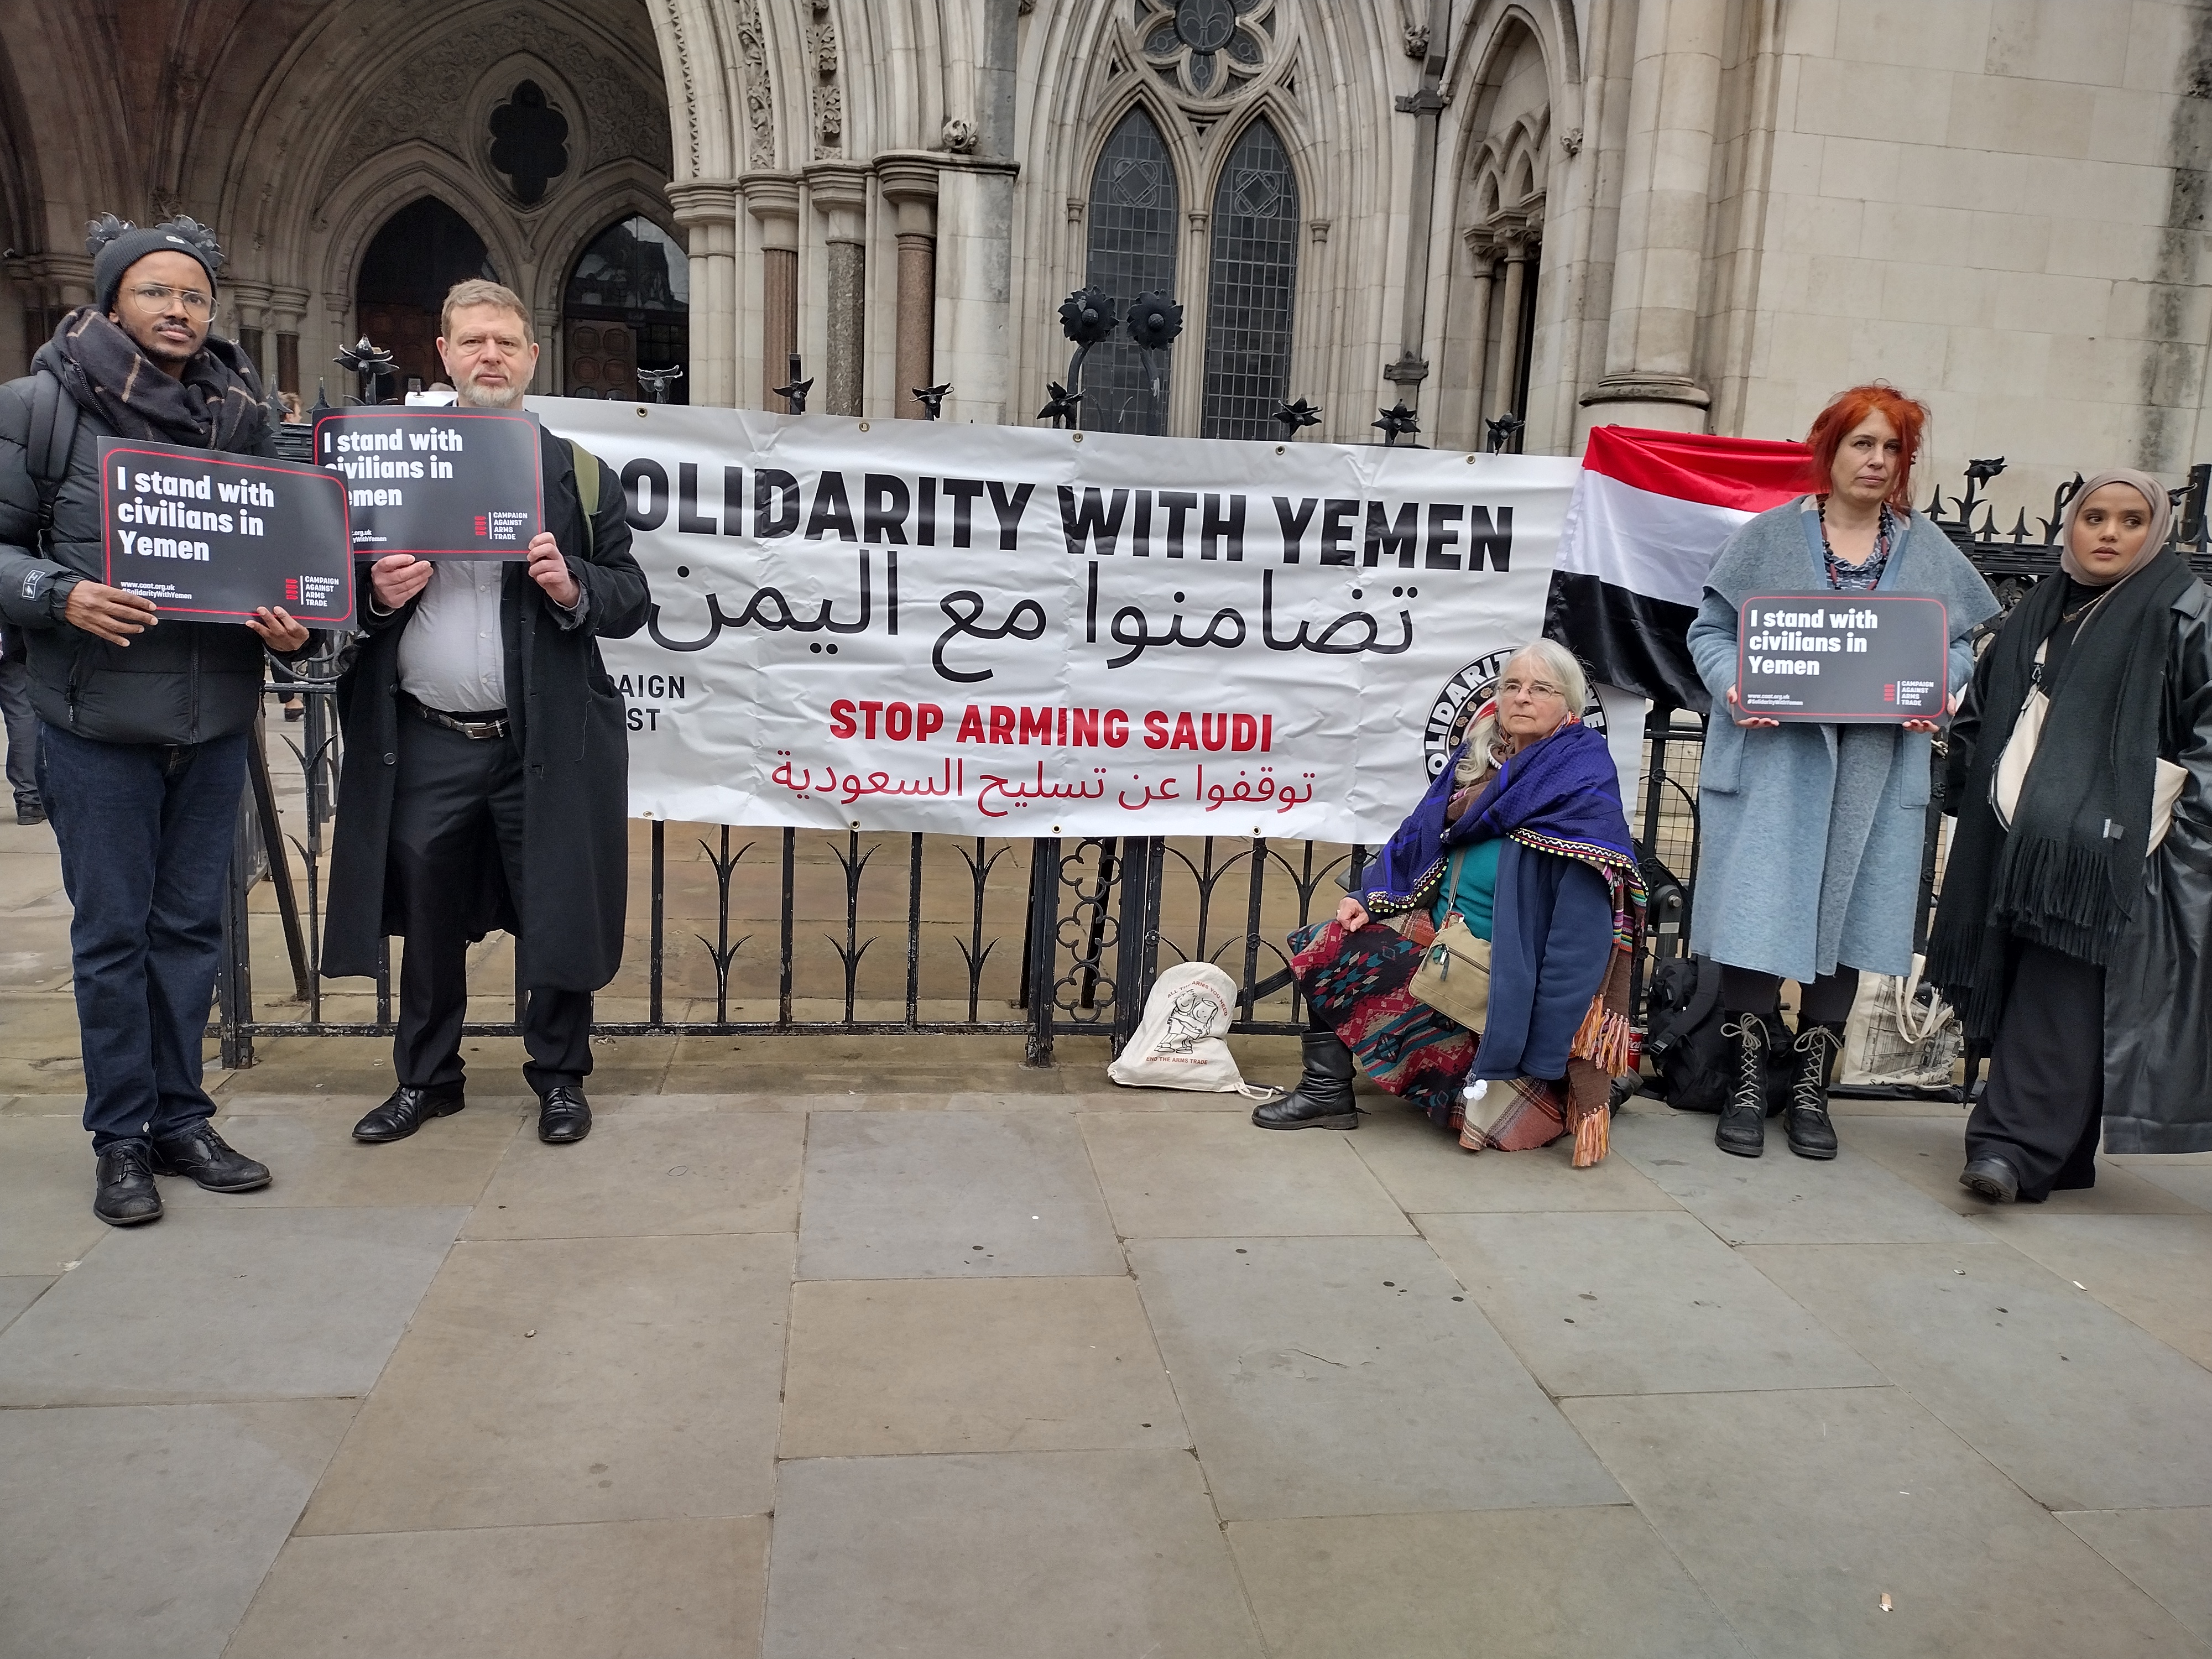 Protesters outside the Royal Courts of Justice with a "Solidarity with Yemen - Stop Arming Saudi" banner